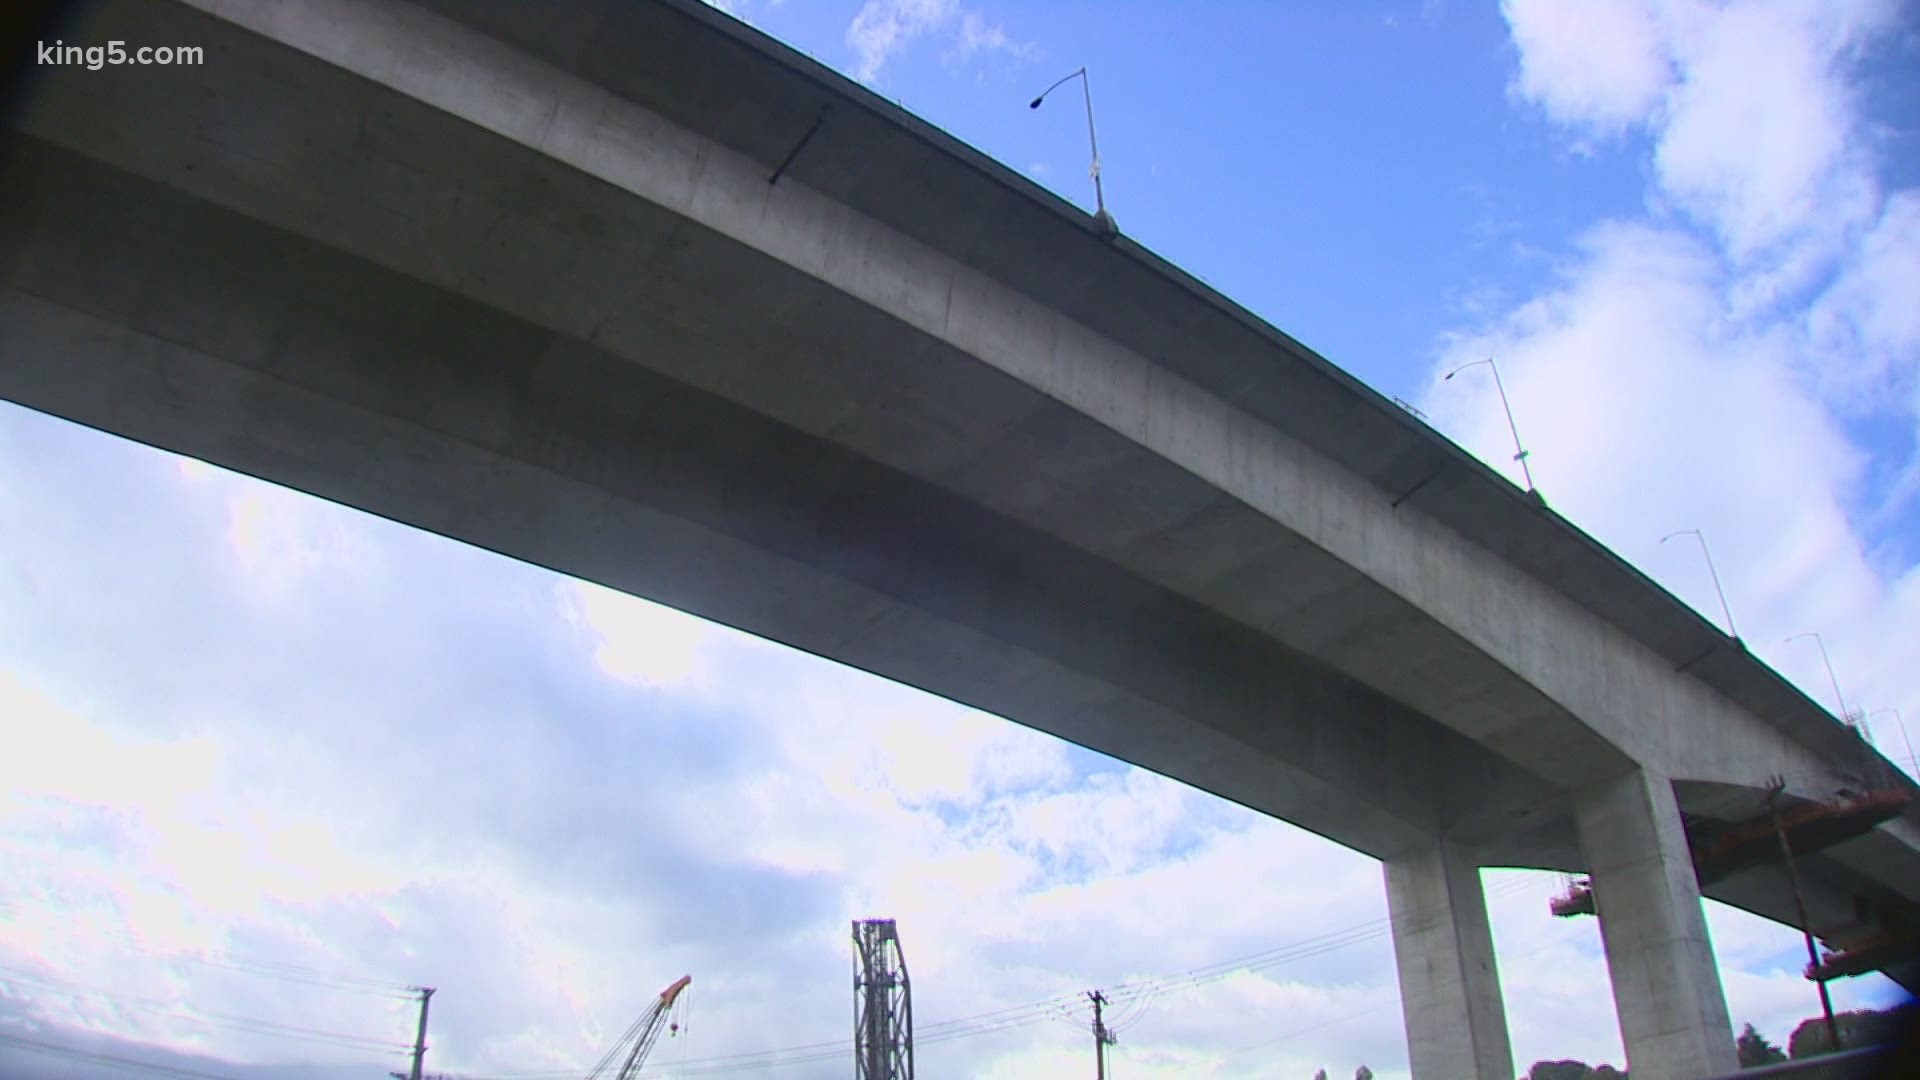 The mayor says the city is measuring costs in the decision to either demolish or repair the West Seattle Bridge and an announcement will be coming soon.